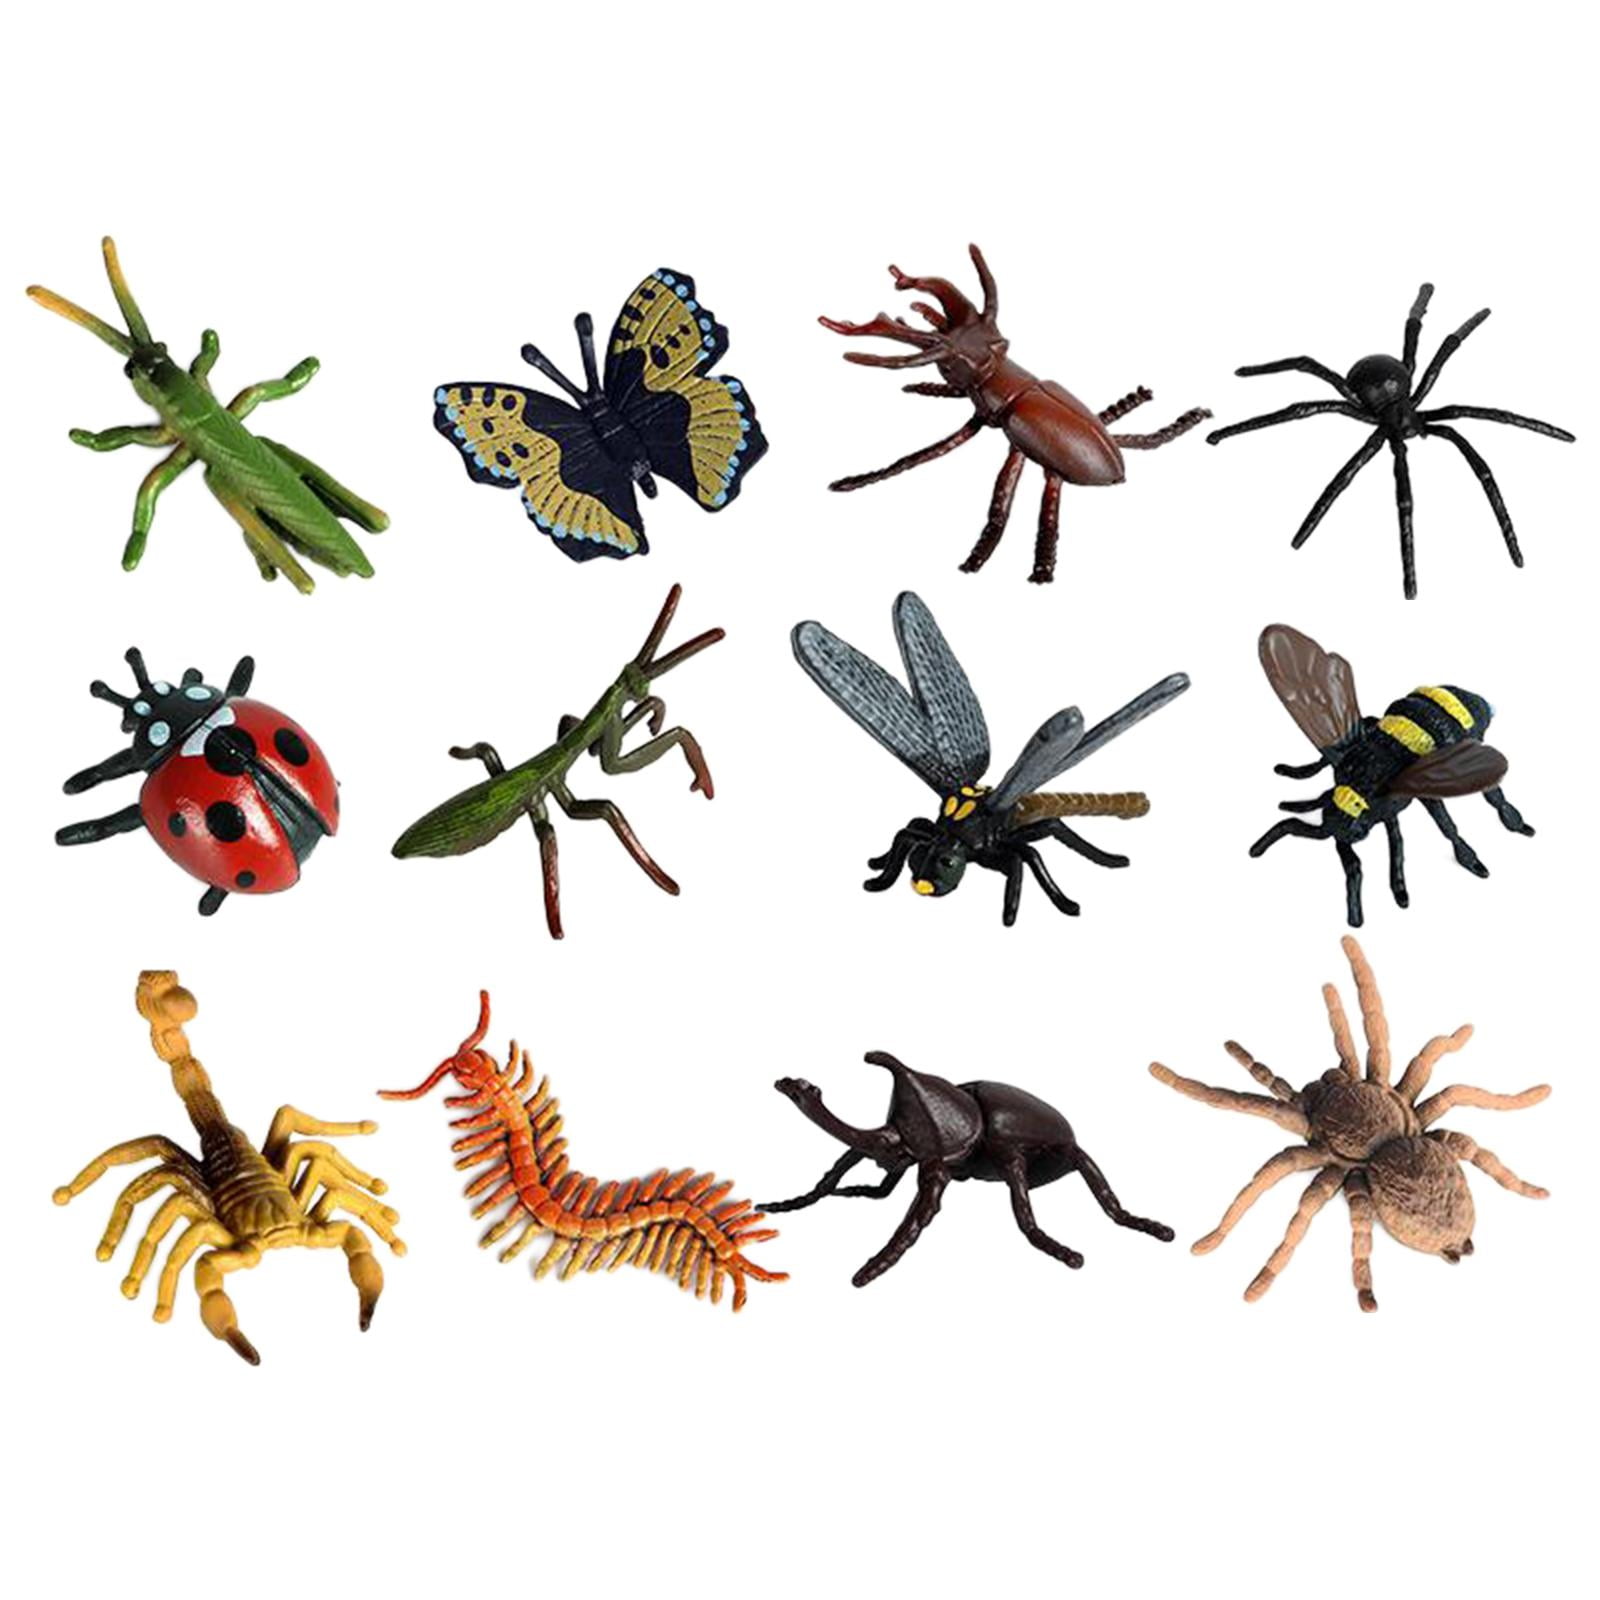 Plastic Insect Model Figures Toys Bugs Action Mantis Scorpion Bee Bag Filler 